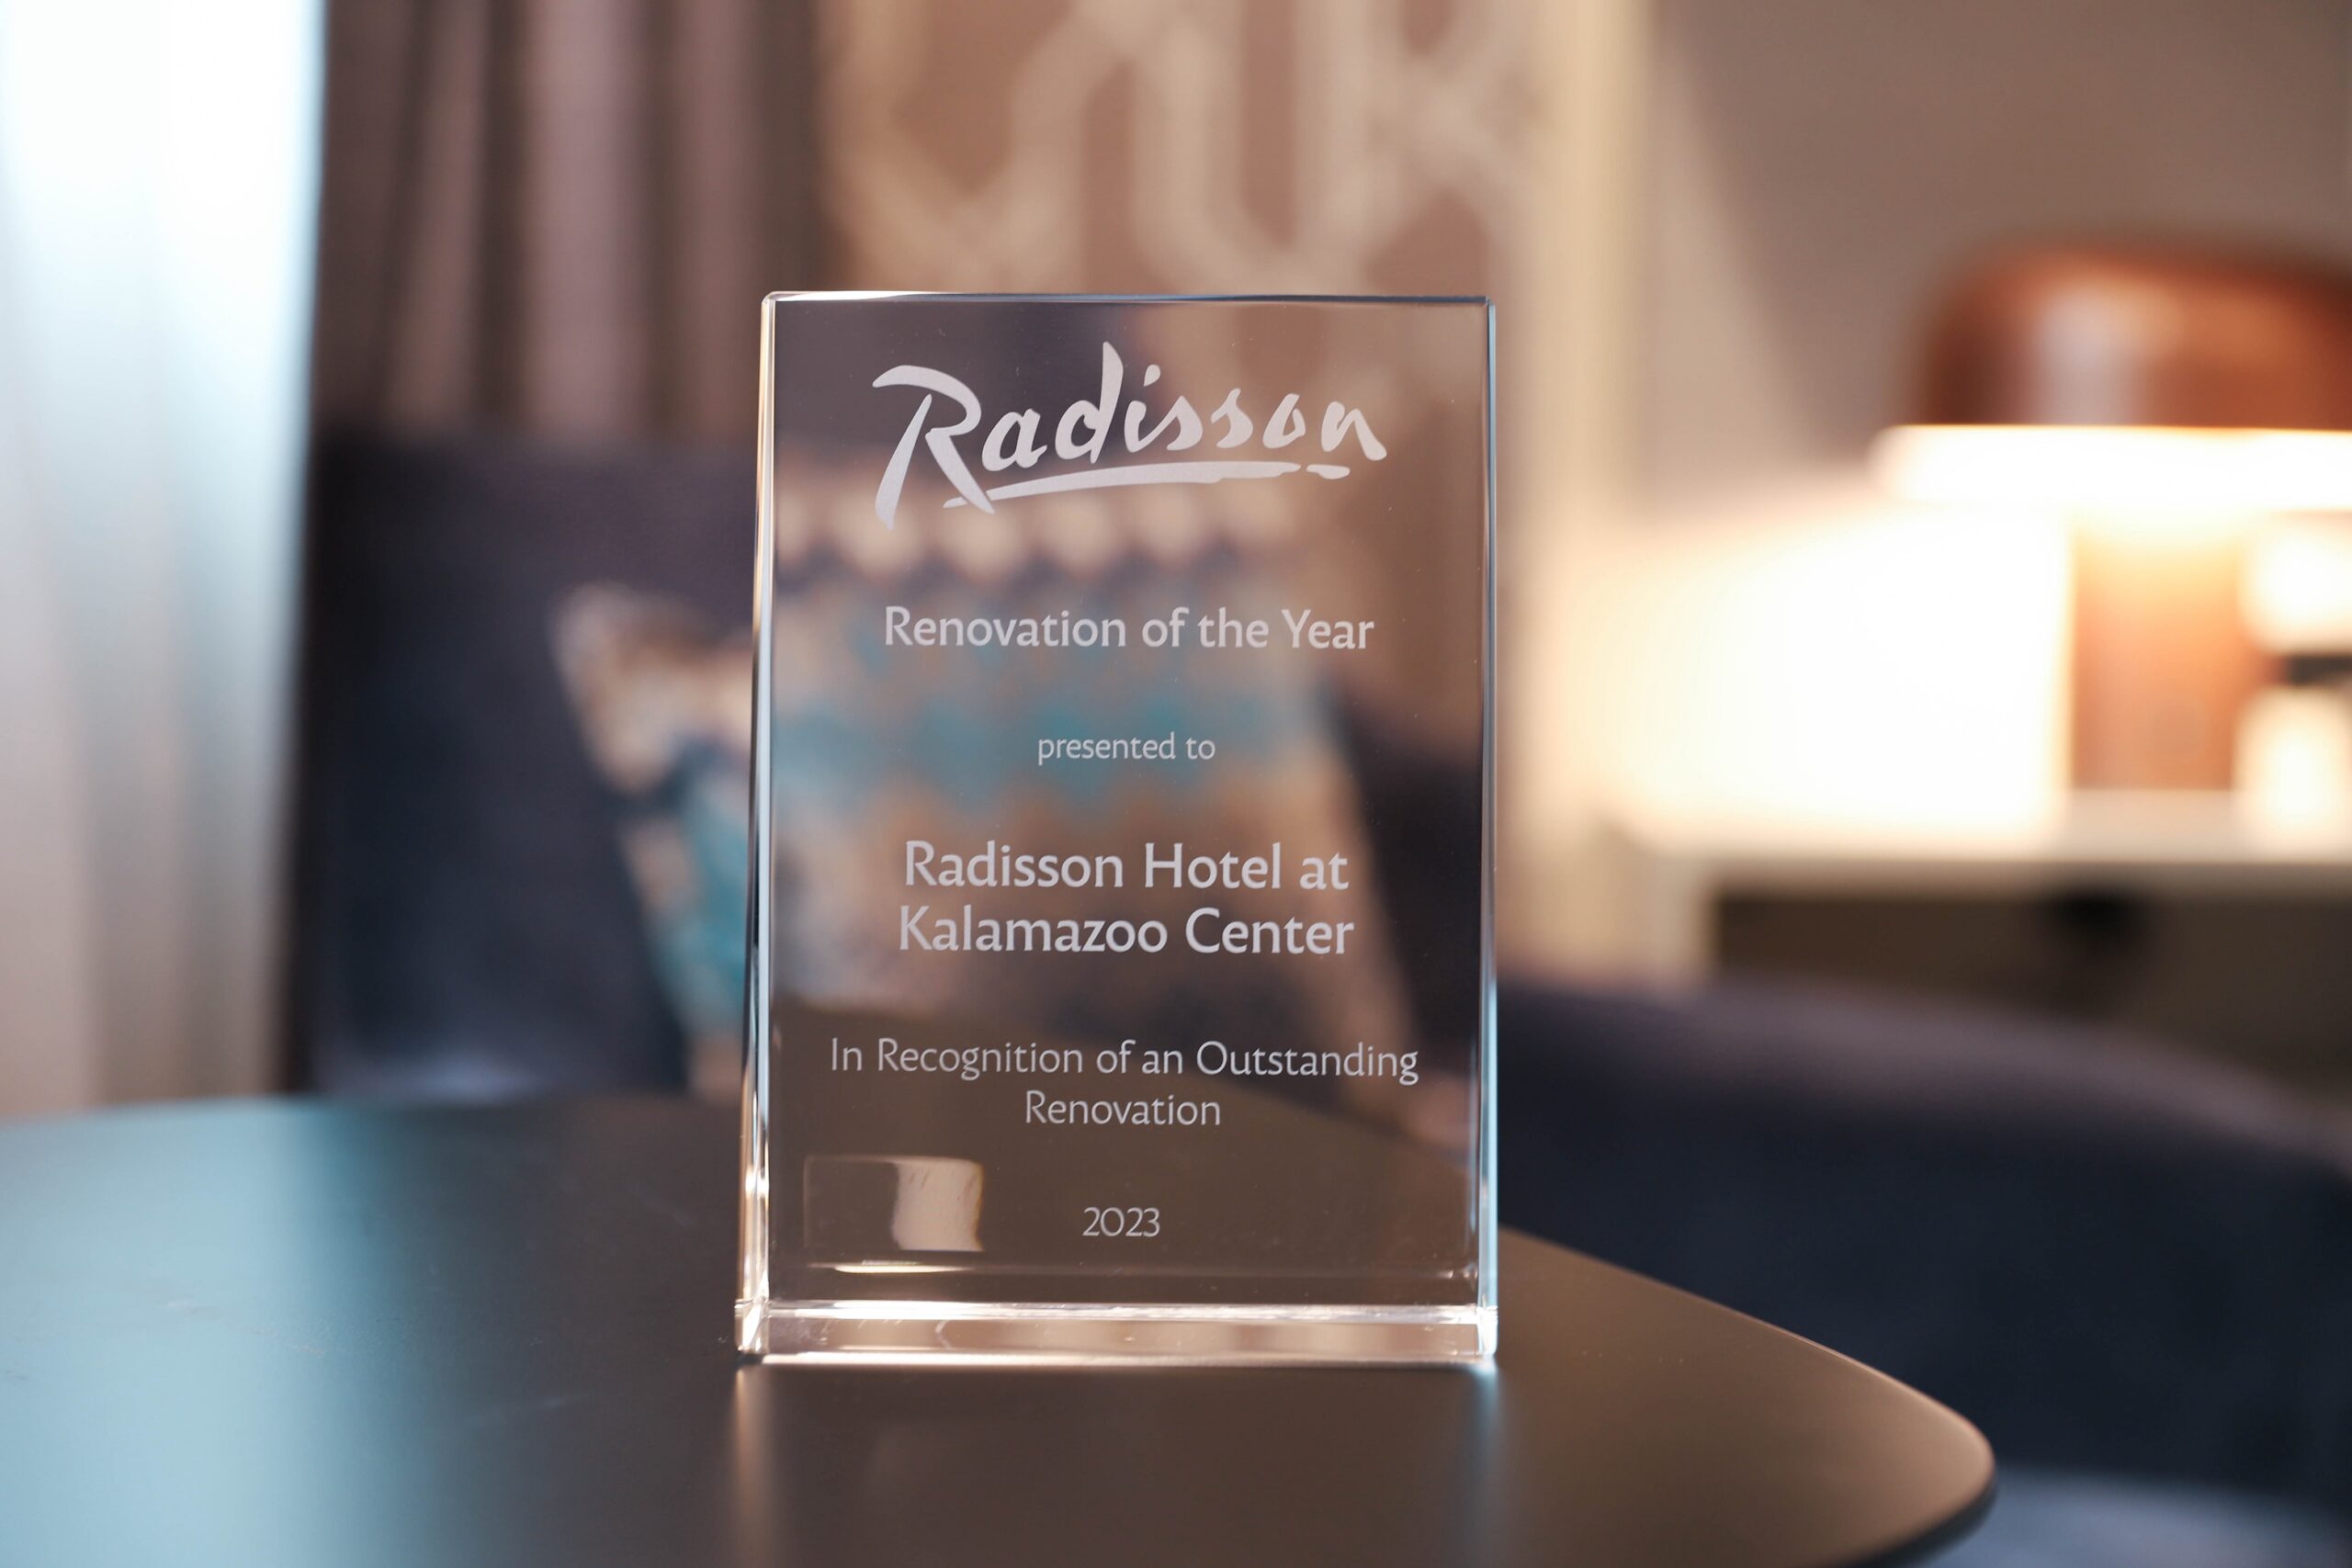 Radisson Plaza Hotel and Suites in Kalamazoo Awarded “Renovation of the Year” by Choice Hotels International